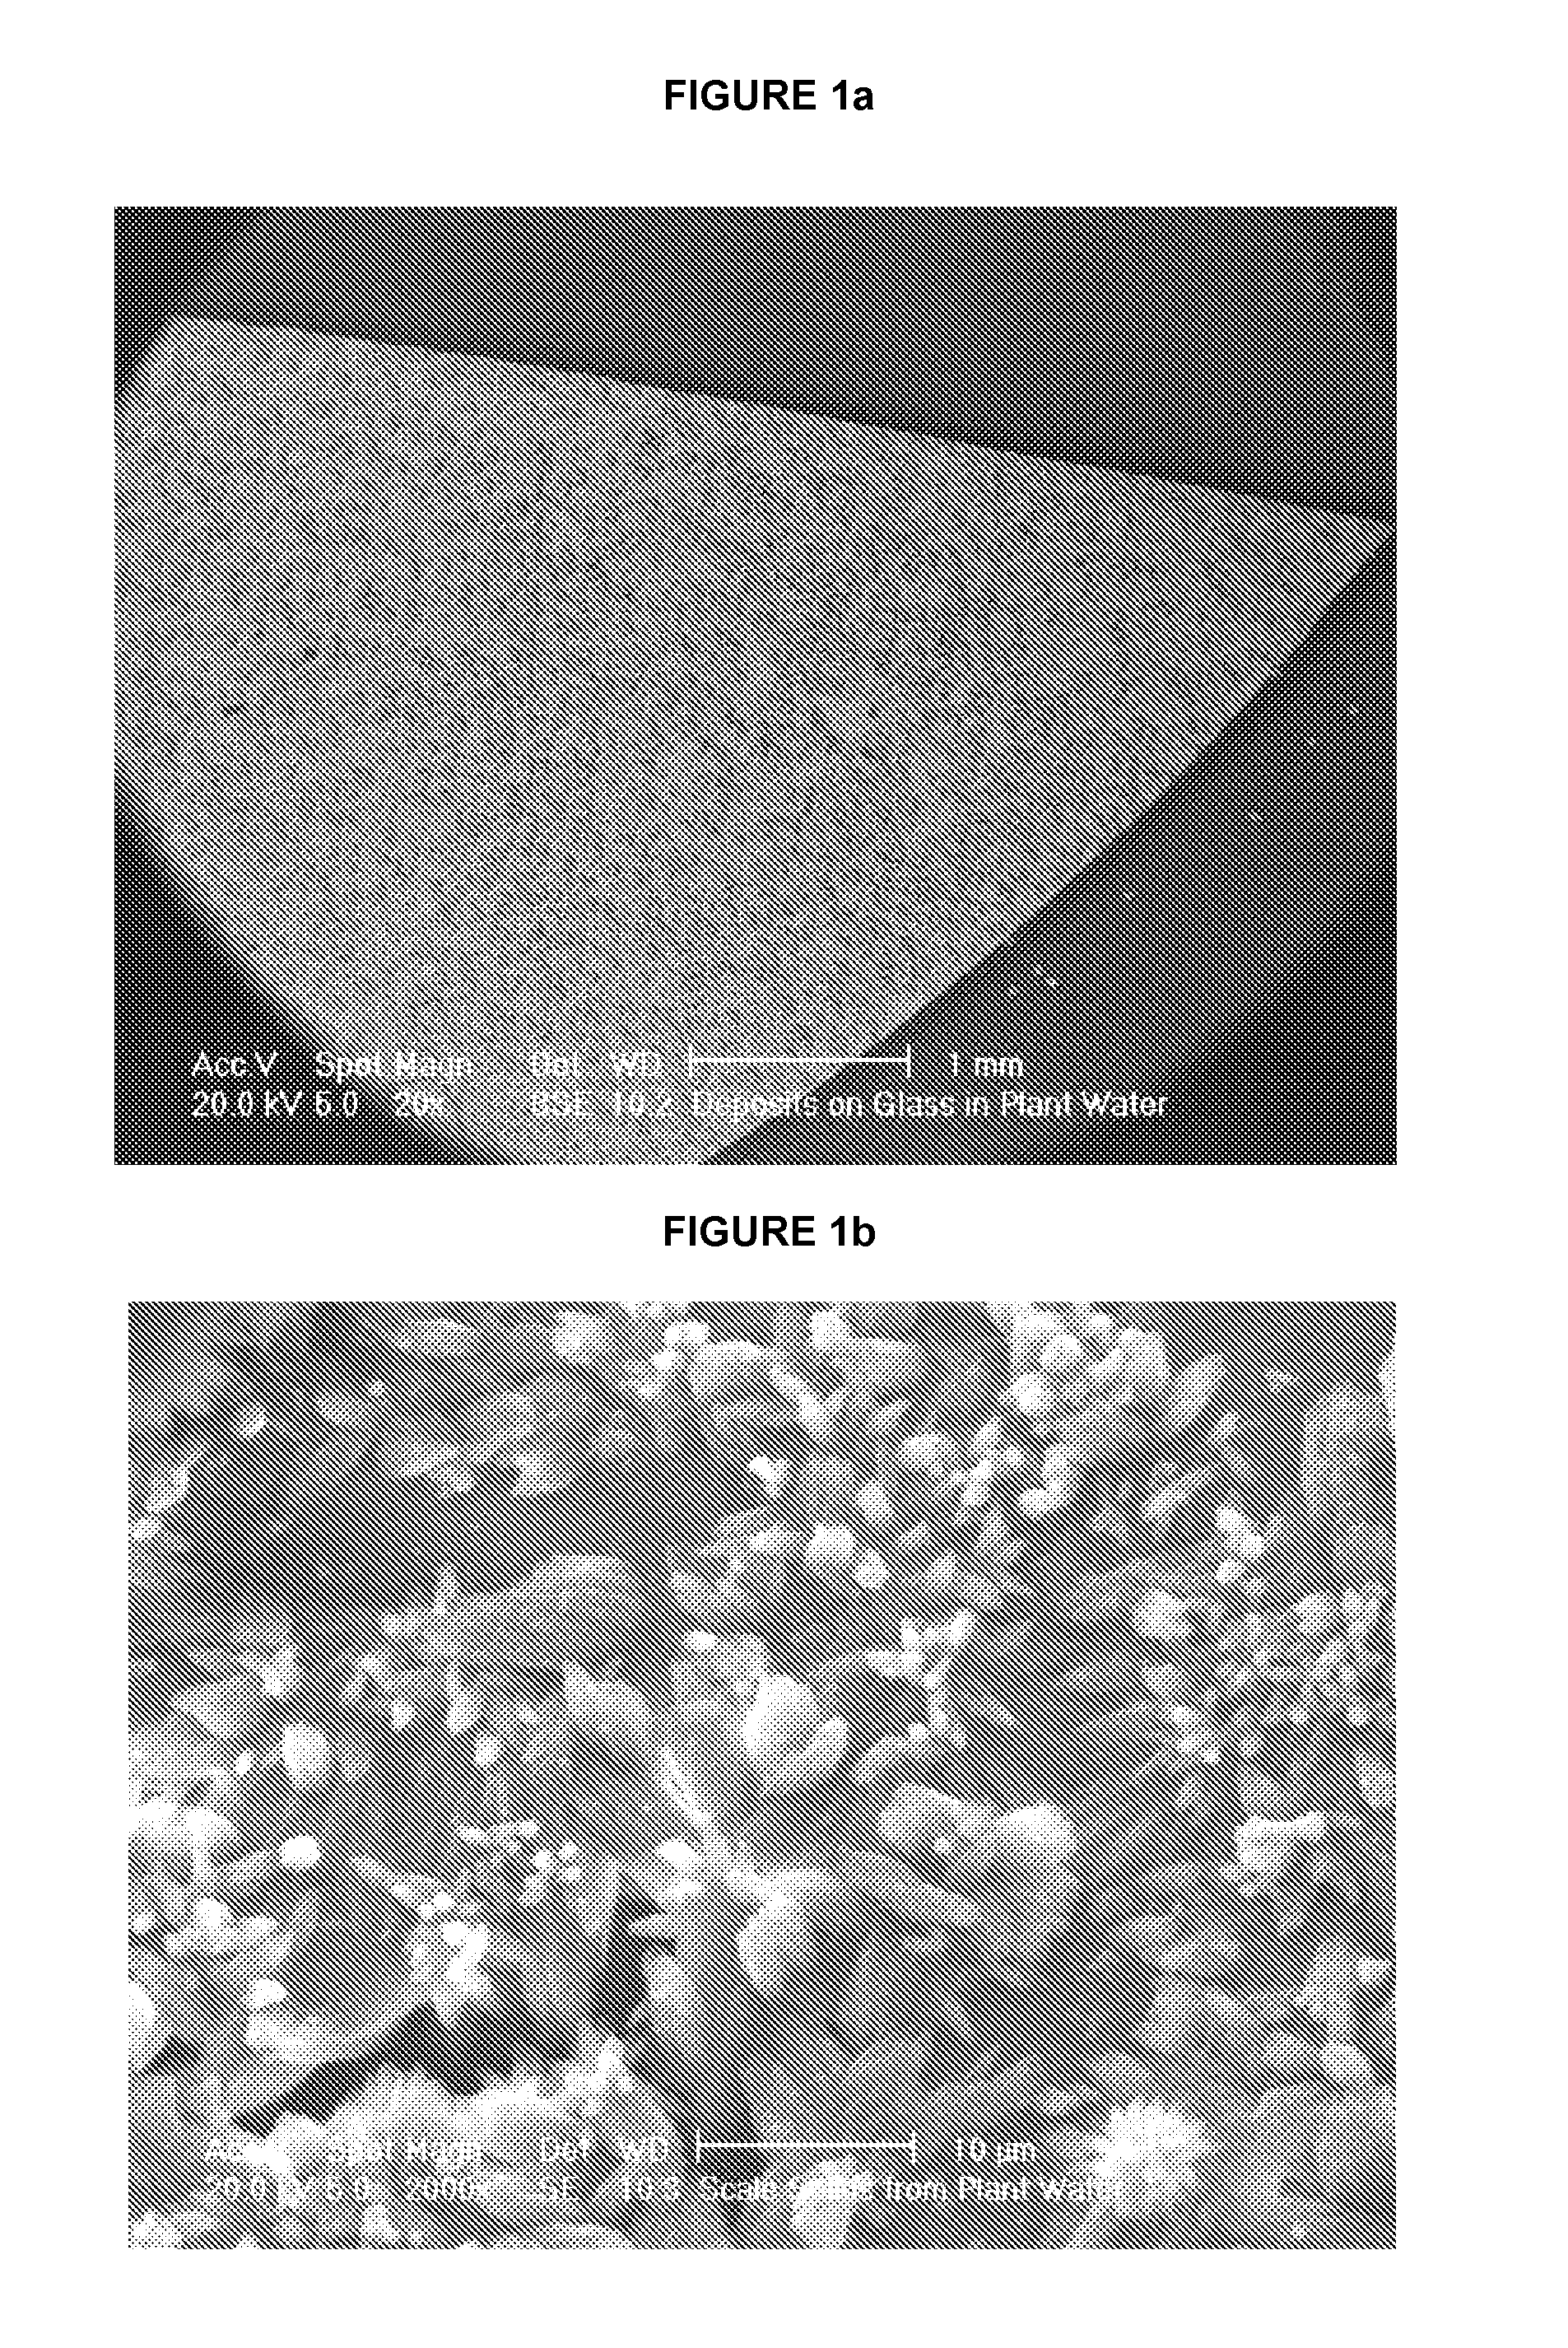 Methods for prevention and reduction of scale formation